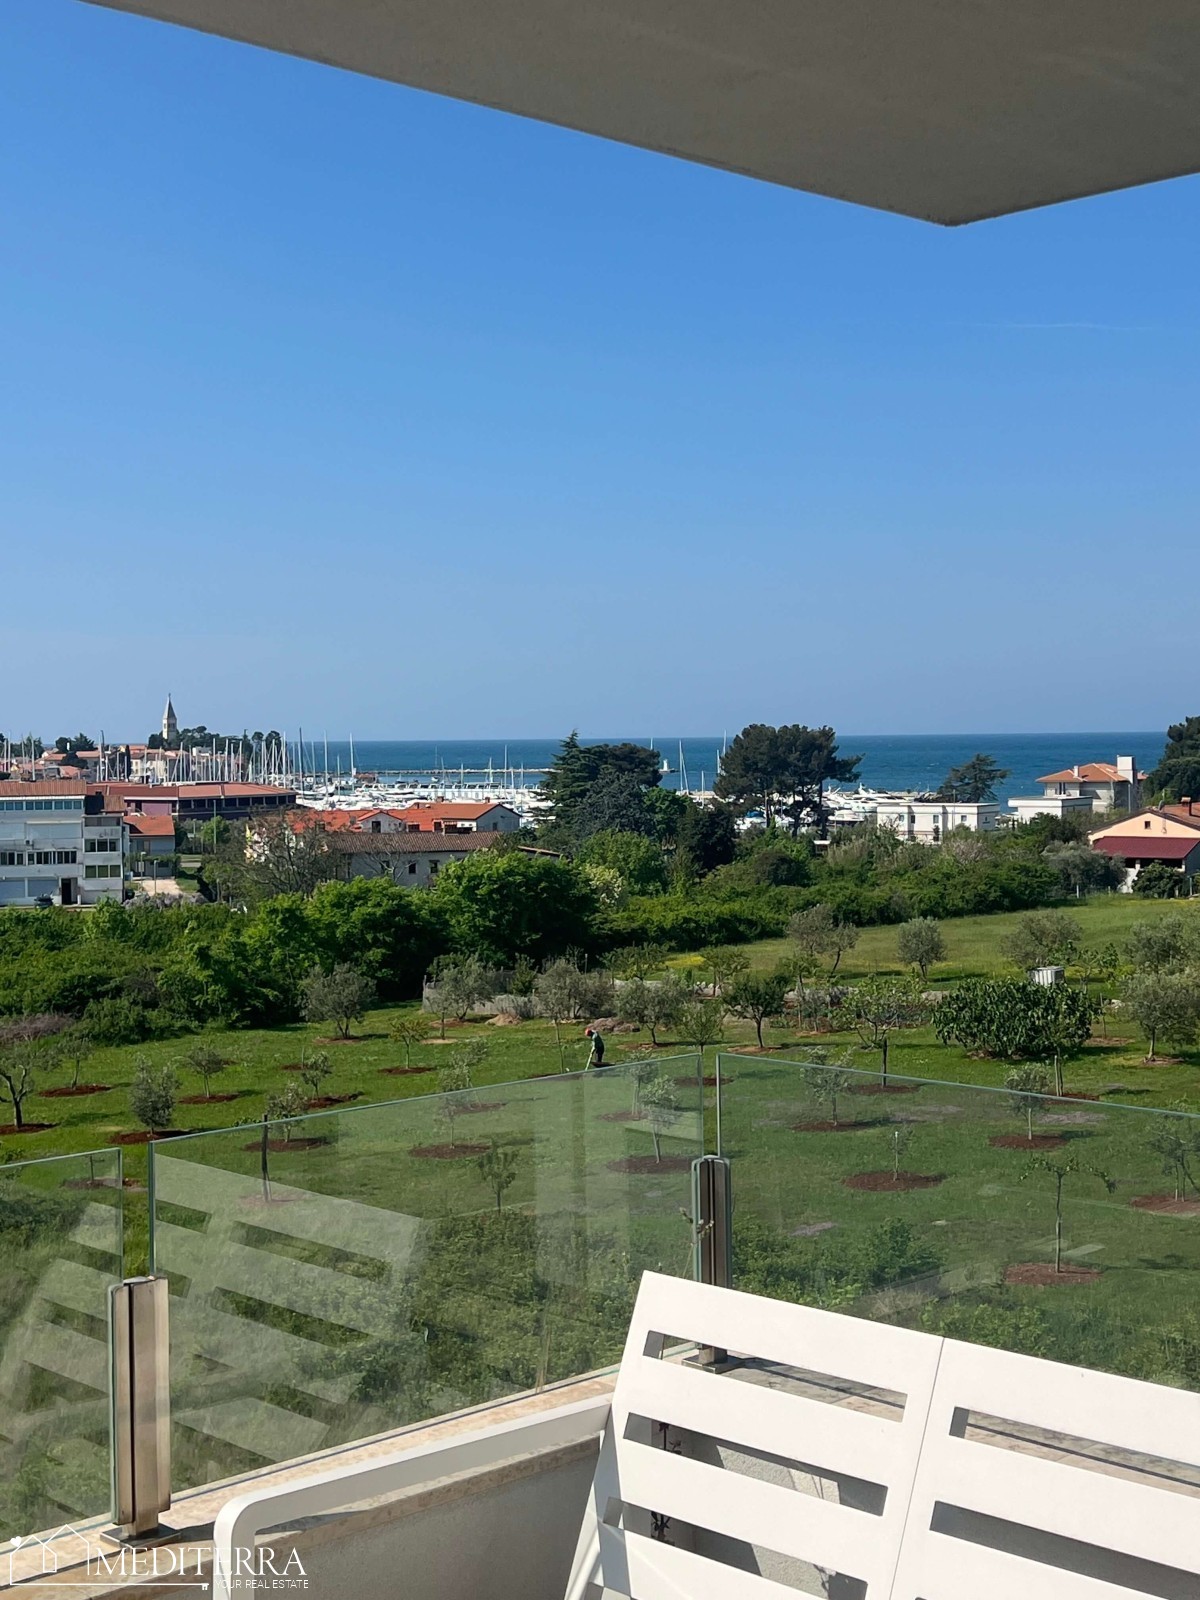 Apartment with a beautiful view of the sea, Novigrad, Istria